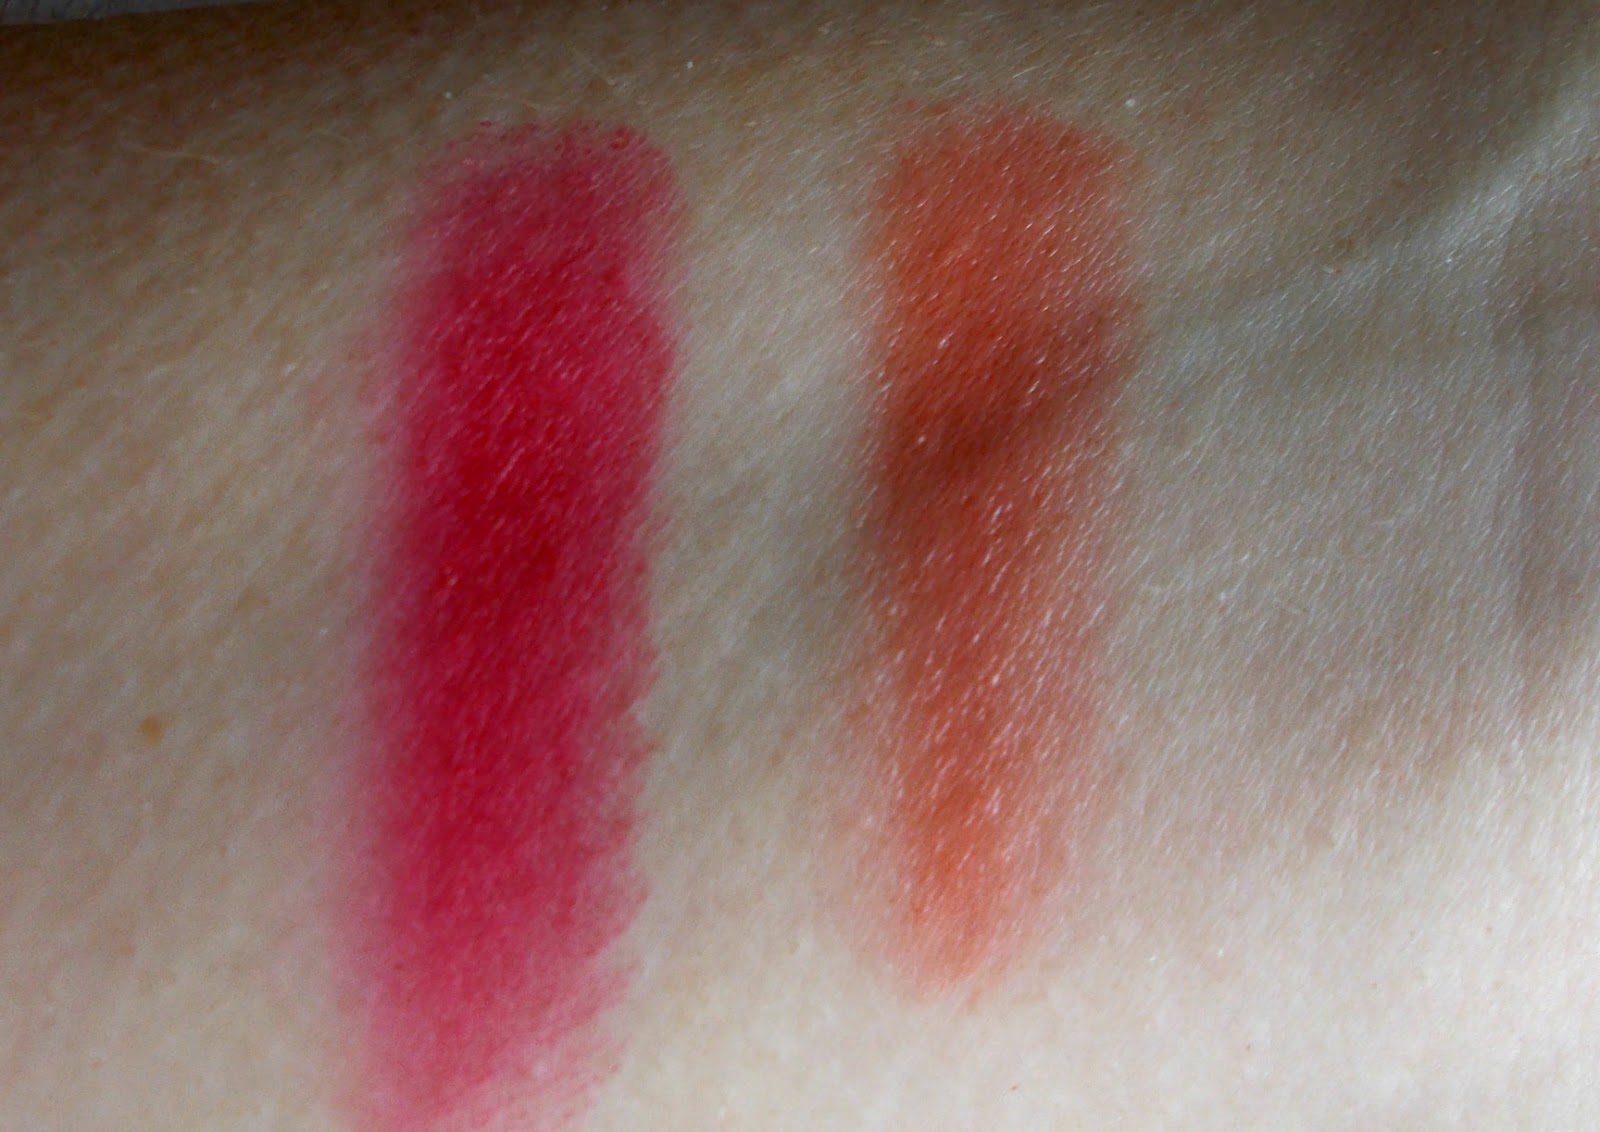 In the Balm of your Hand lip swatches